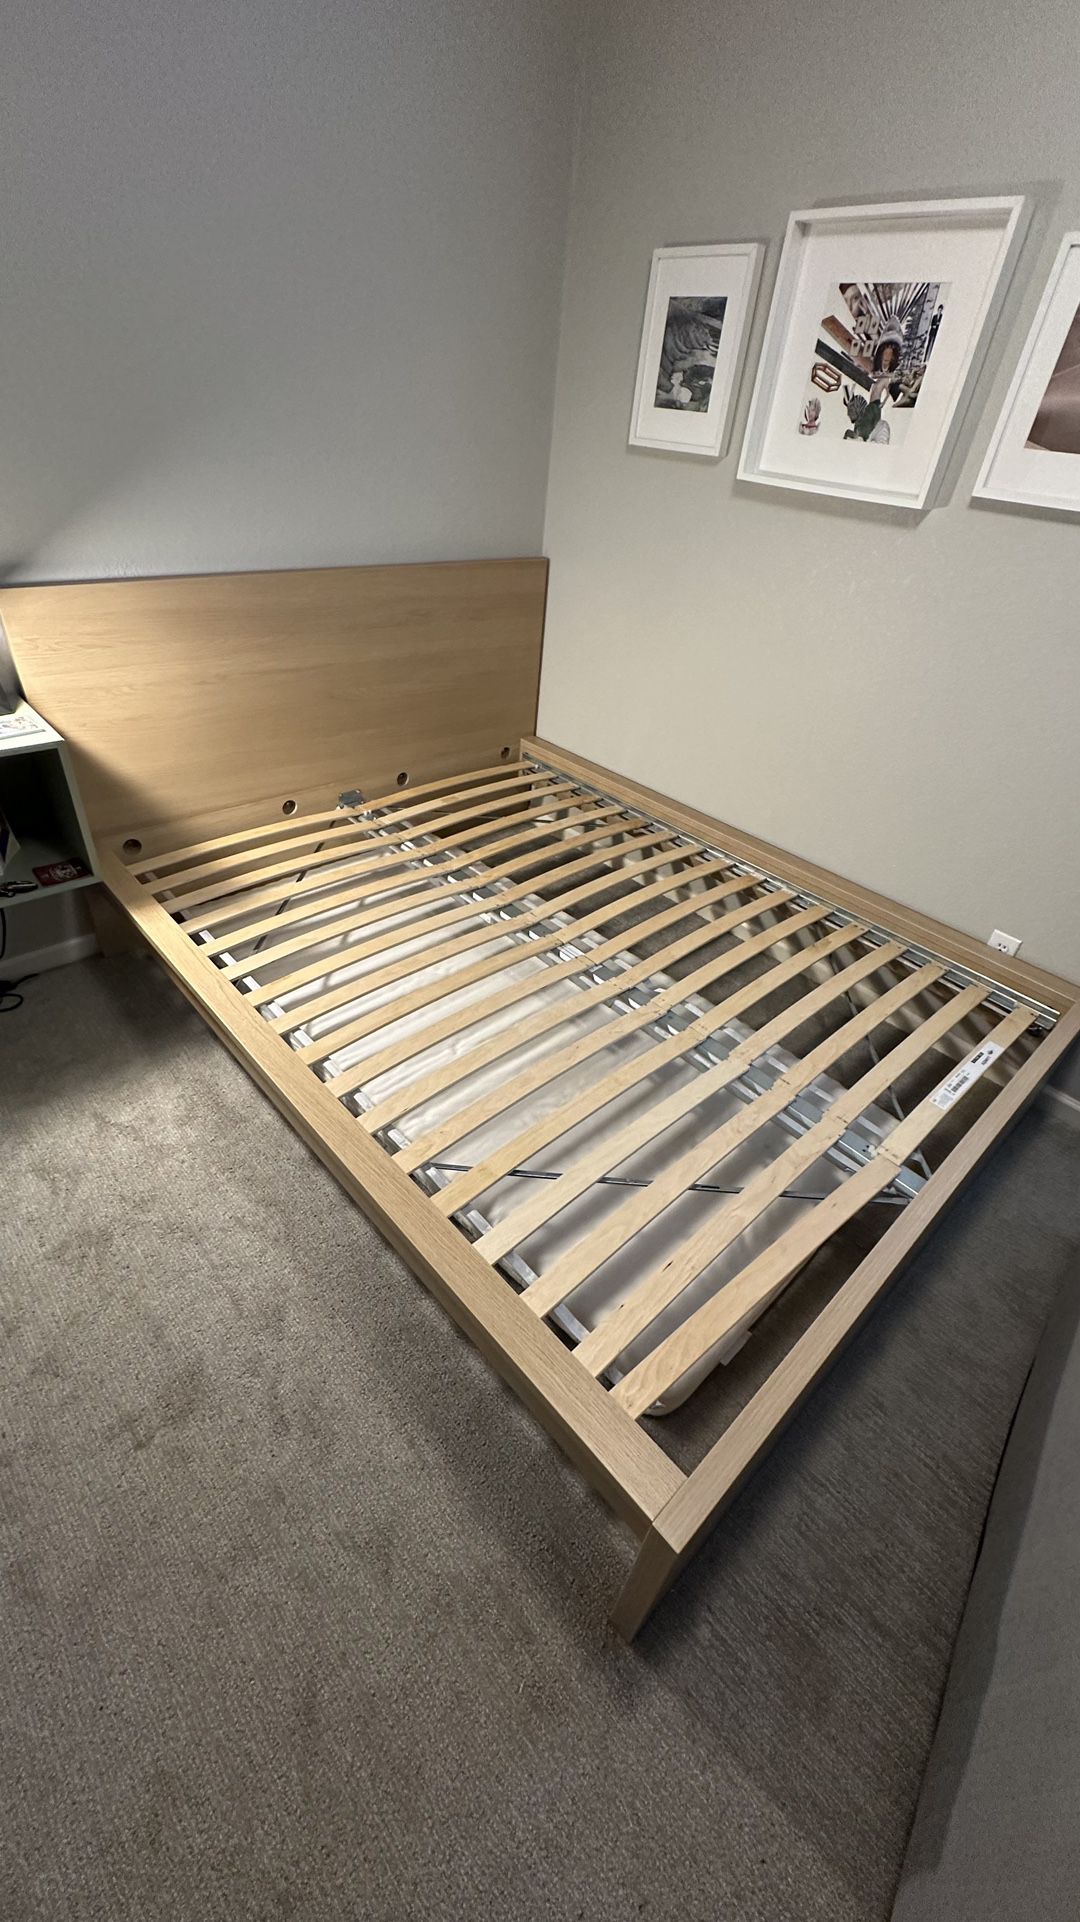 Queen Bed Frame - MALM